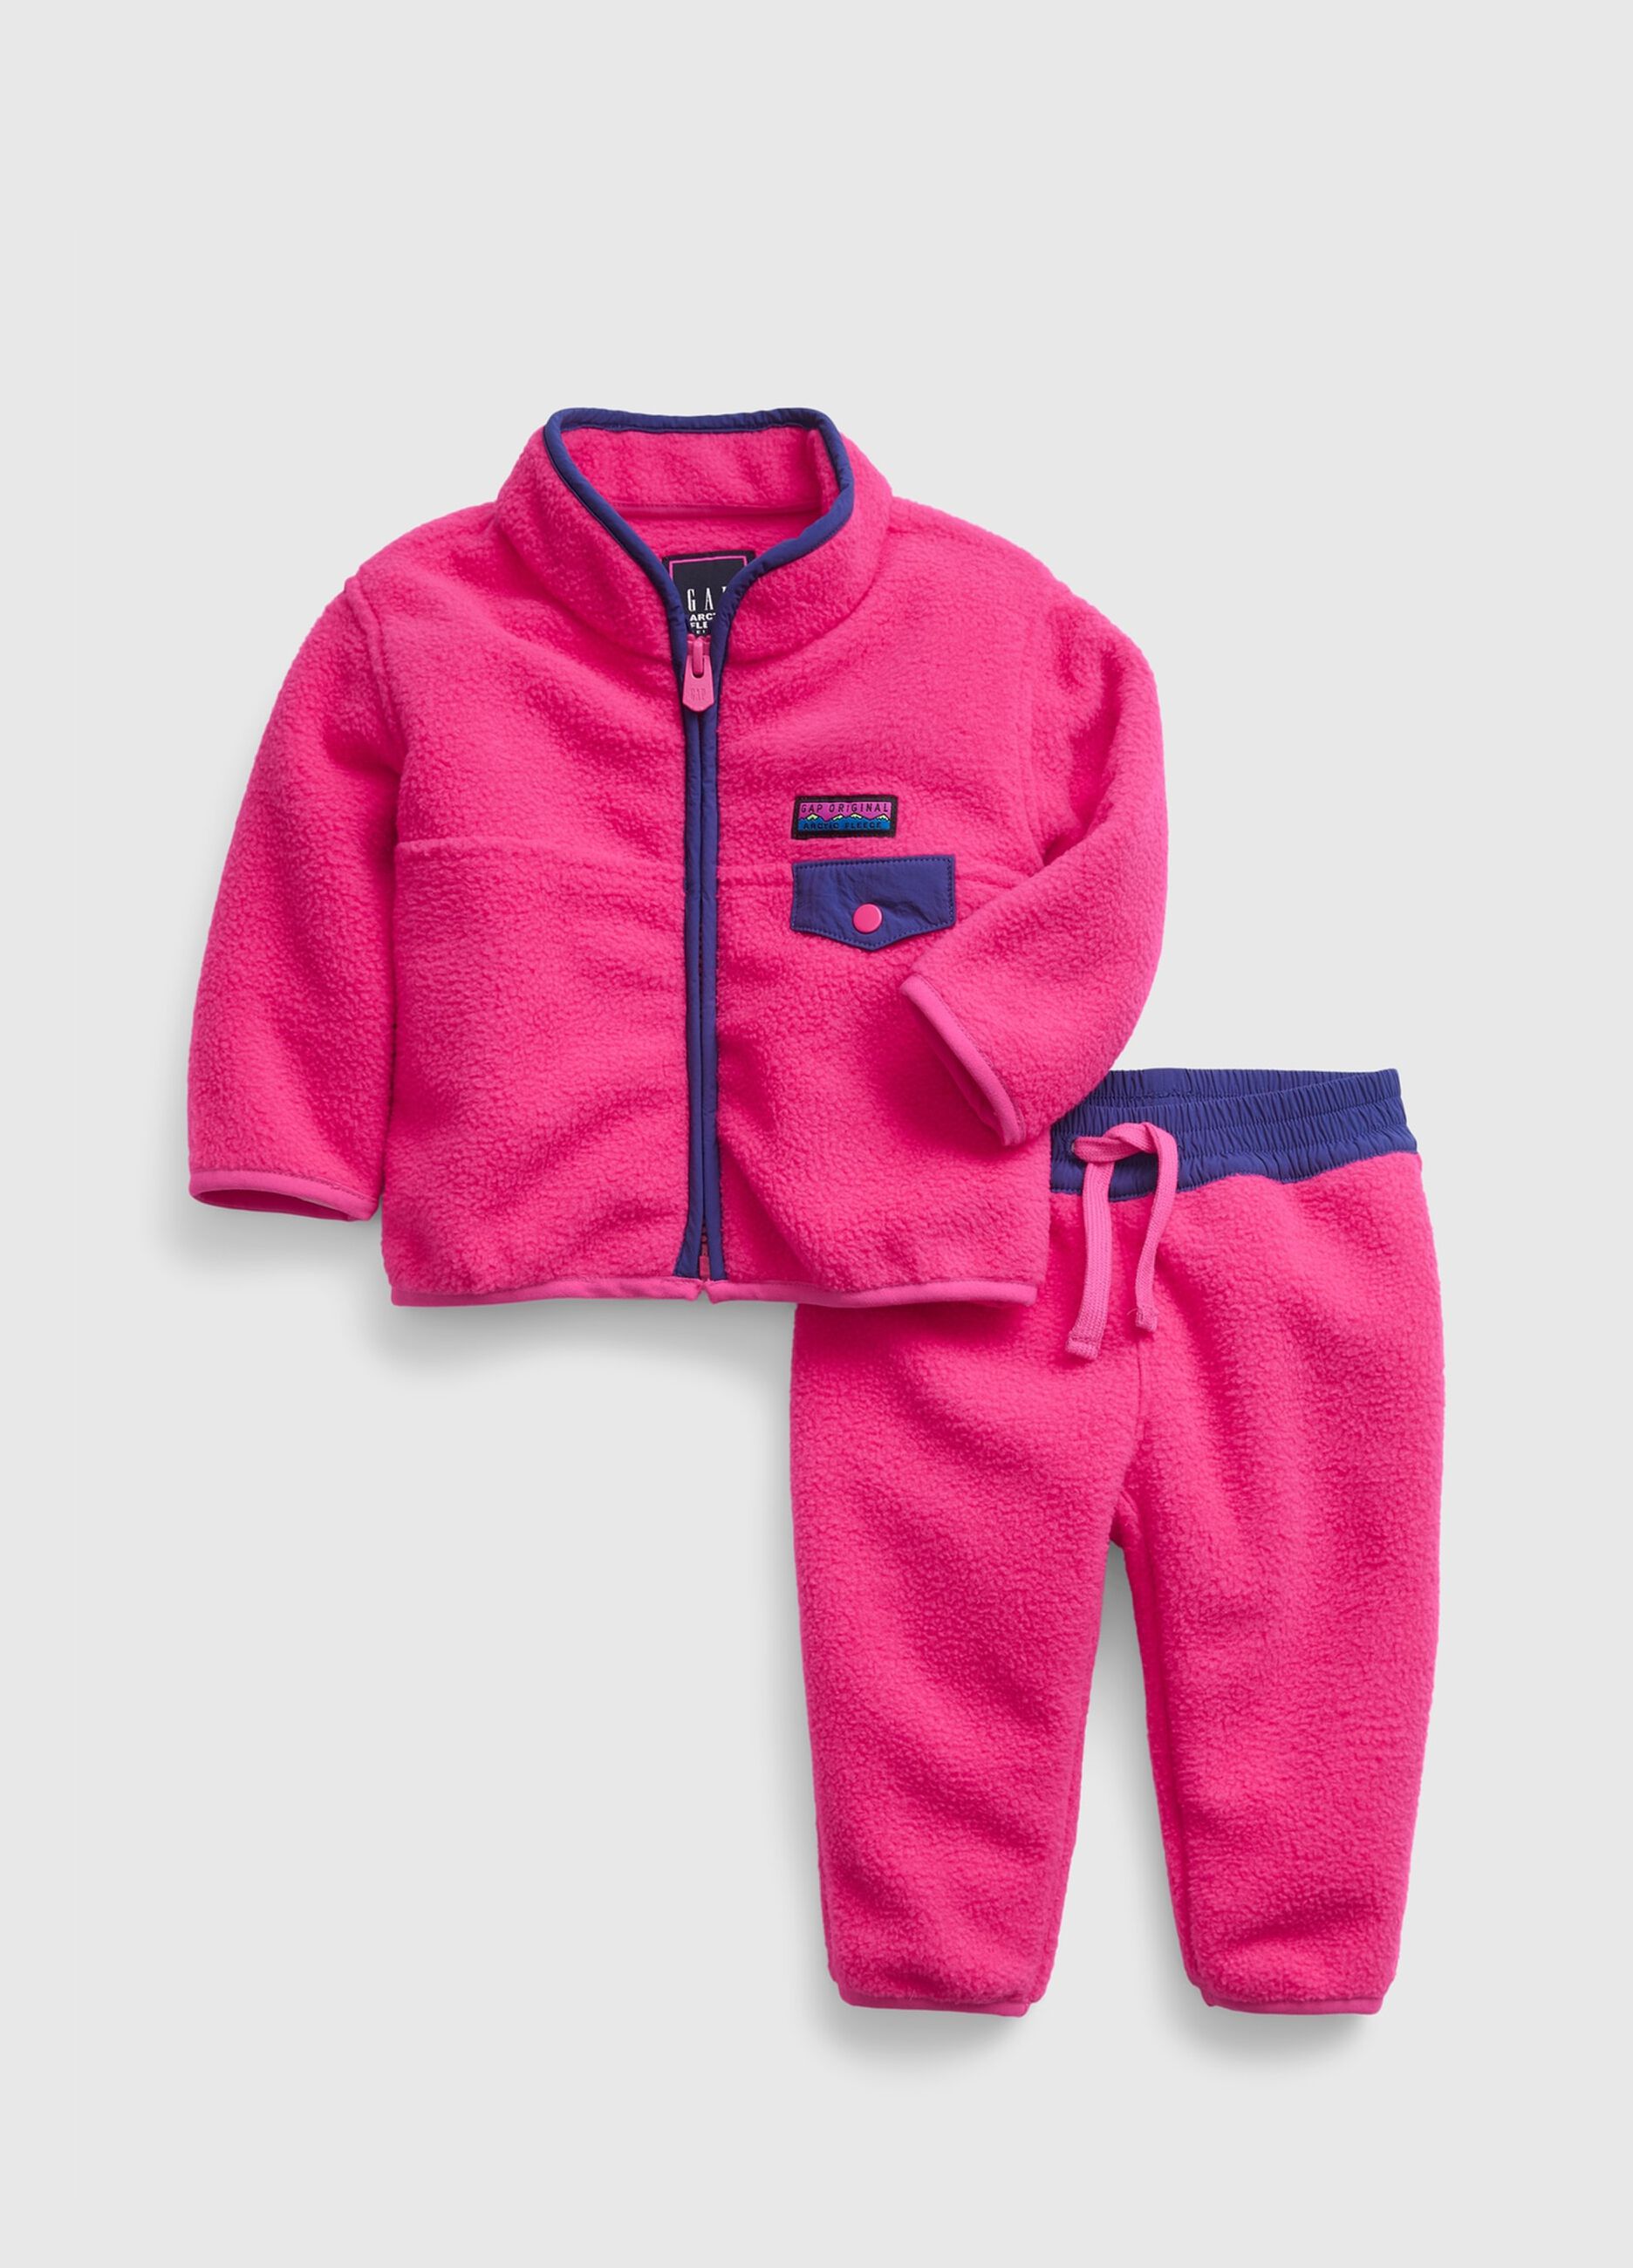 Fleece outfit with contrasting trims